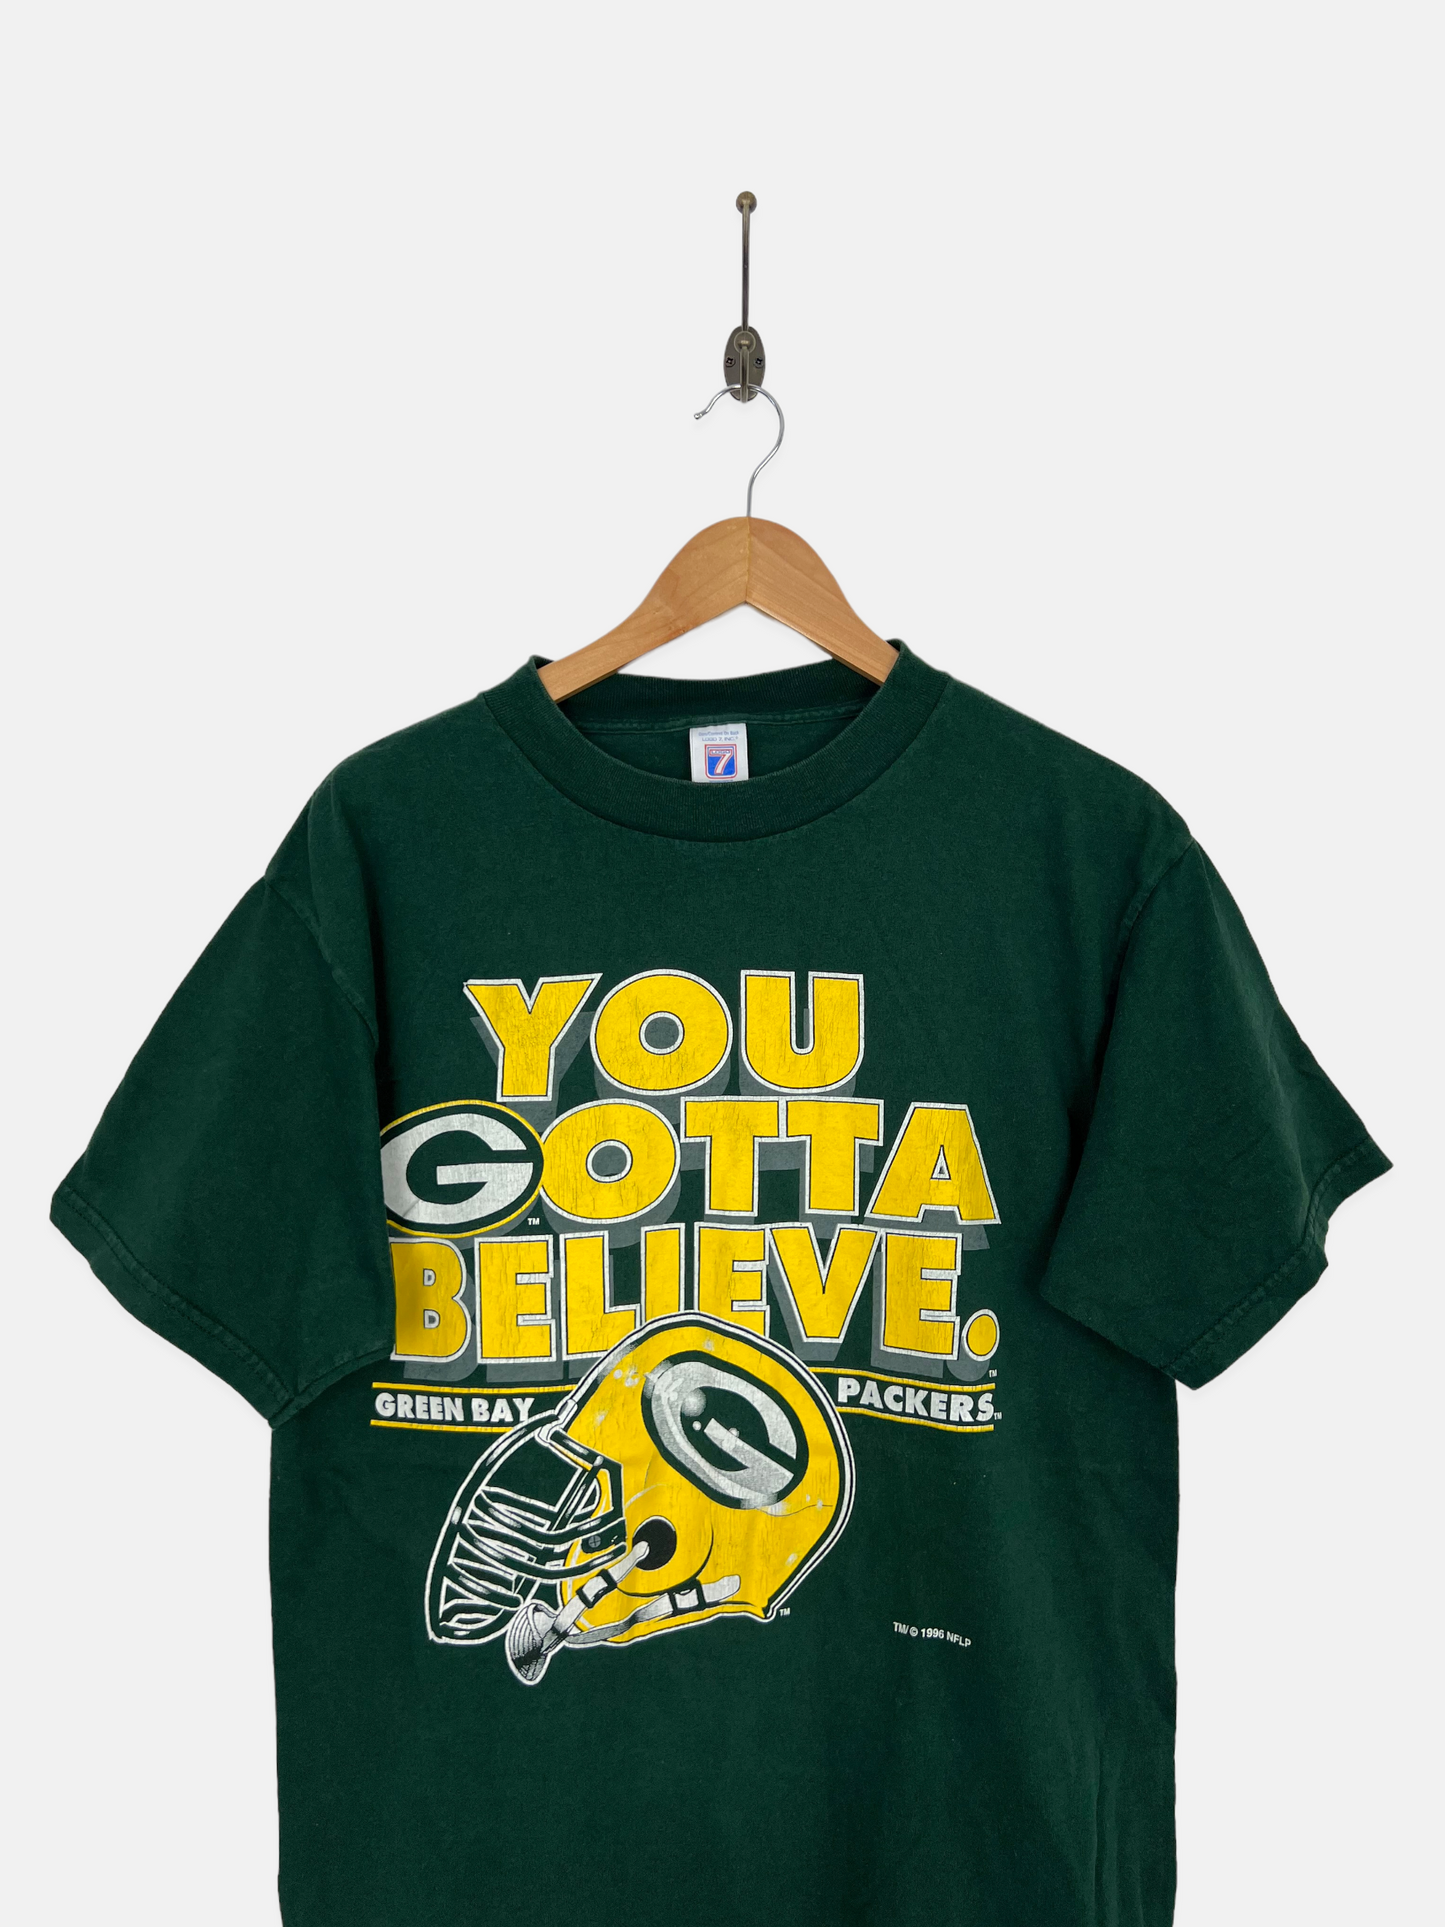 1996 Green Bay Packers NFL USA Made Vintage T-Shirt Size 12